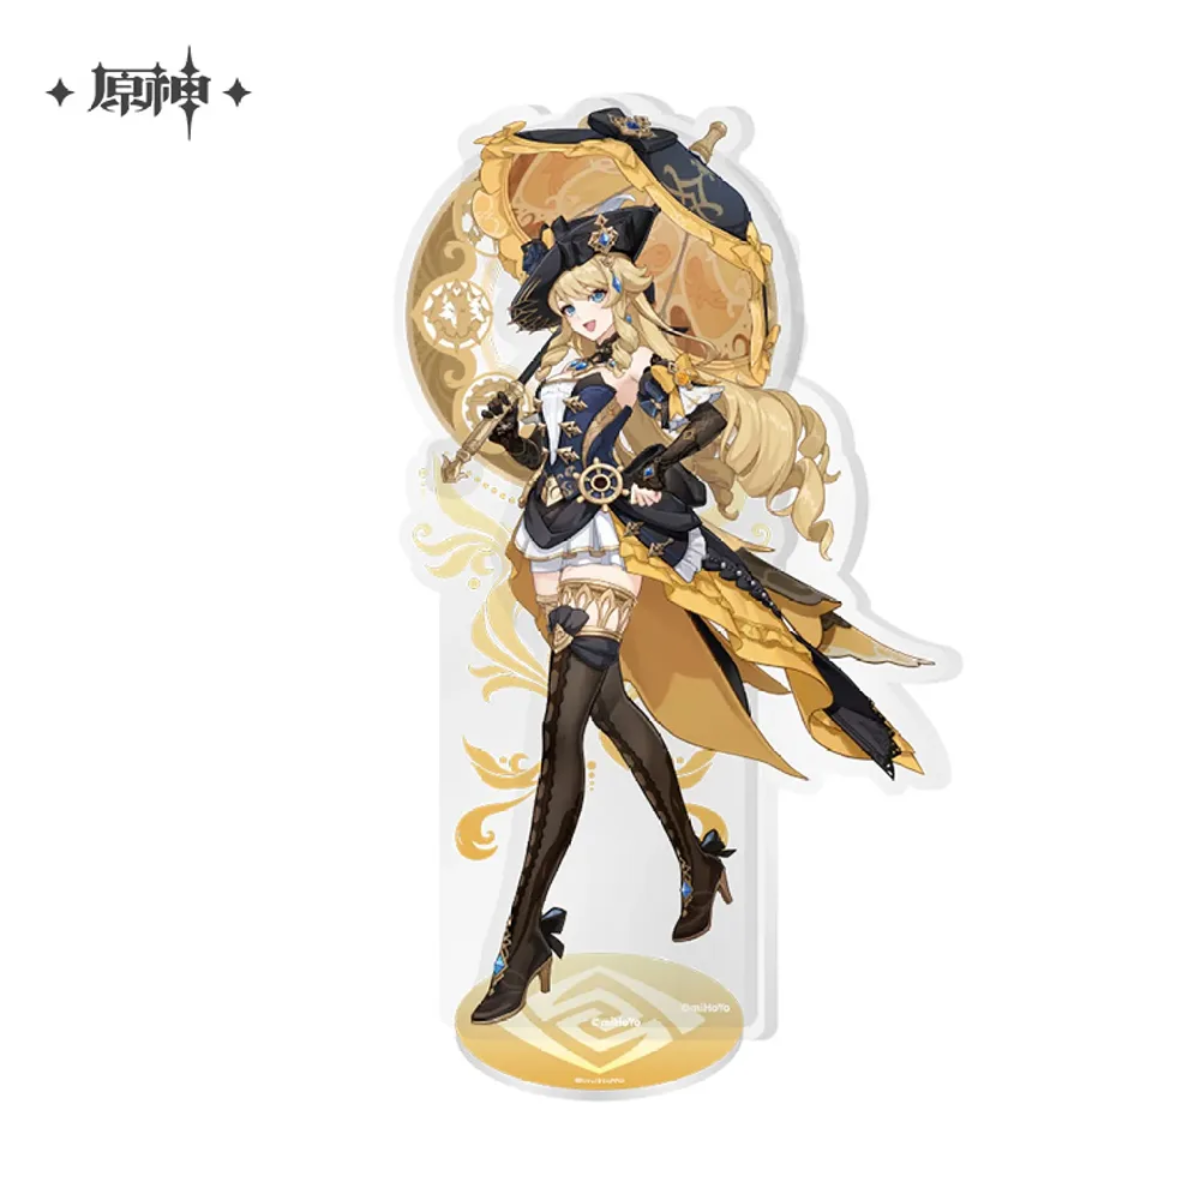 miHoYo Genshin Impact - Court of Fontaine Series Characters Acrylic Stand-Navia-miHoYo-Ace Cards &amp; Collectibles